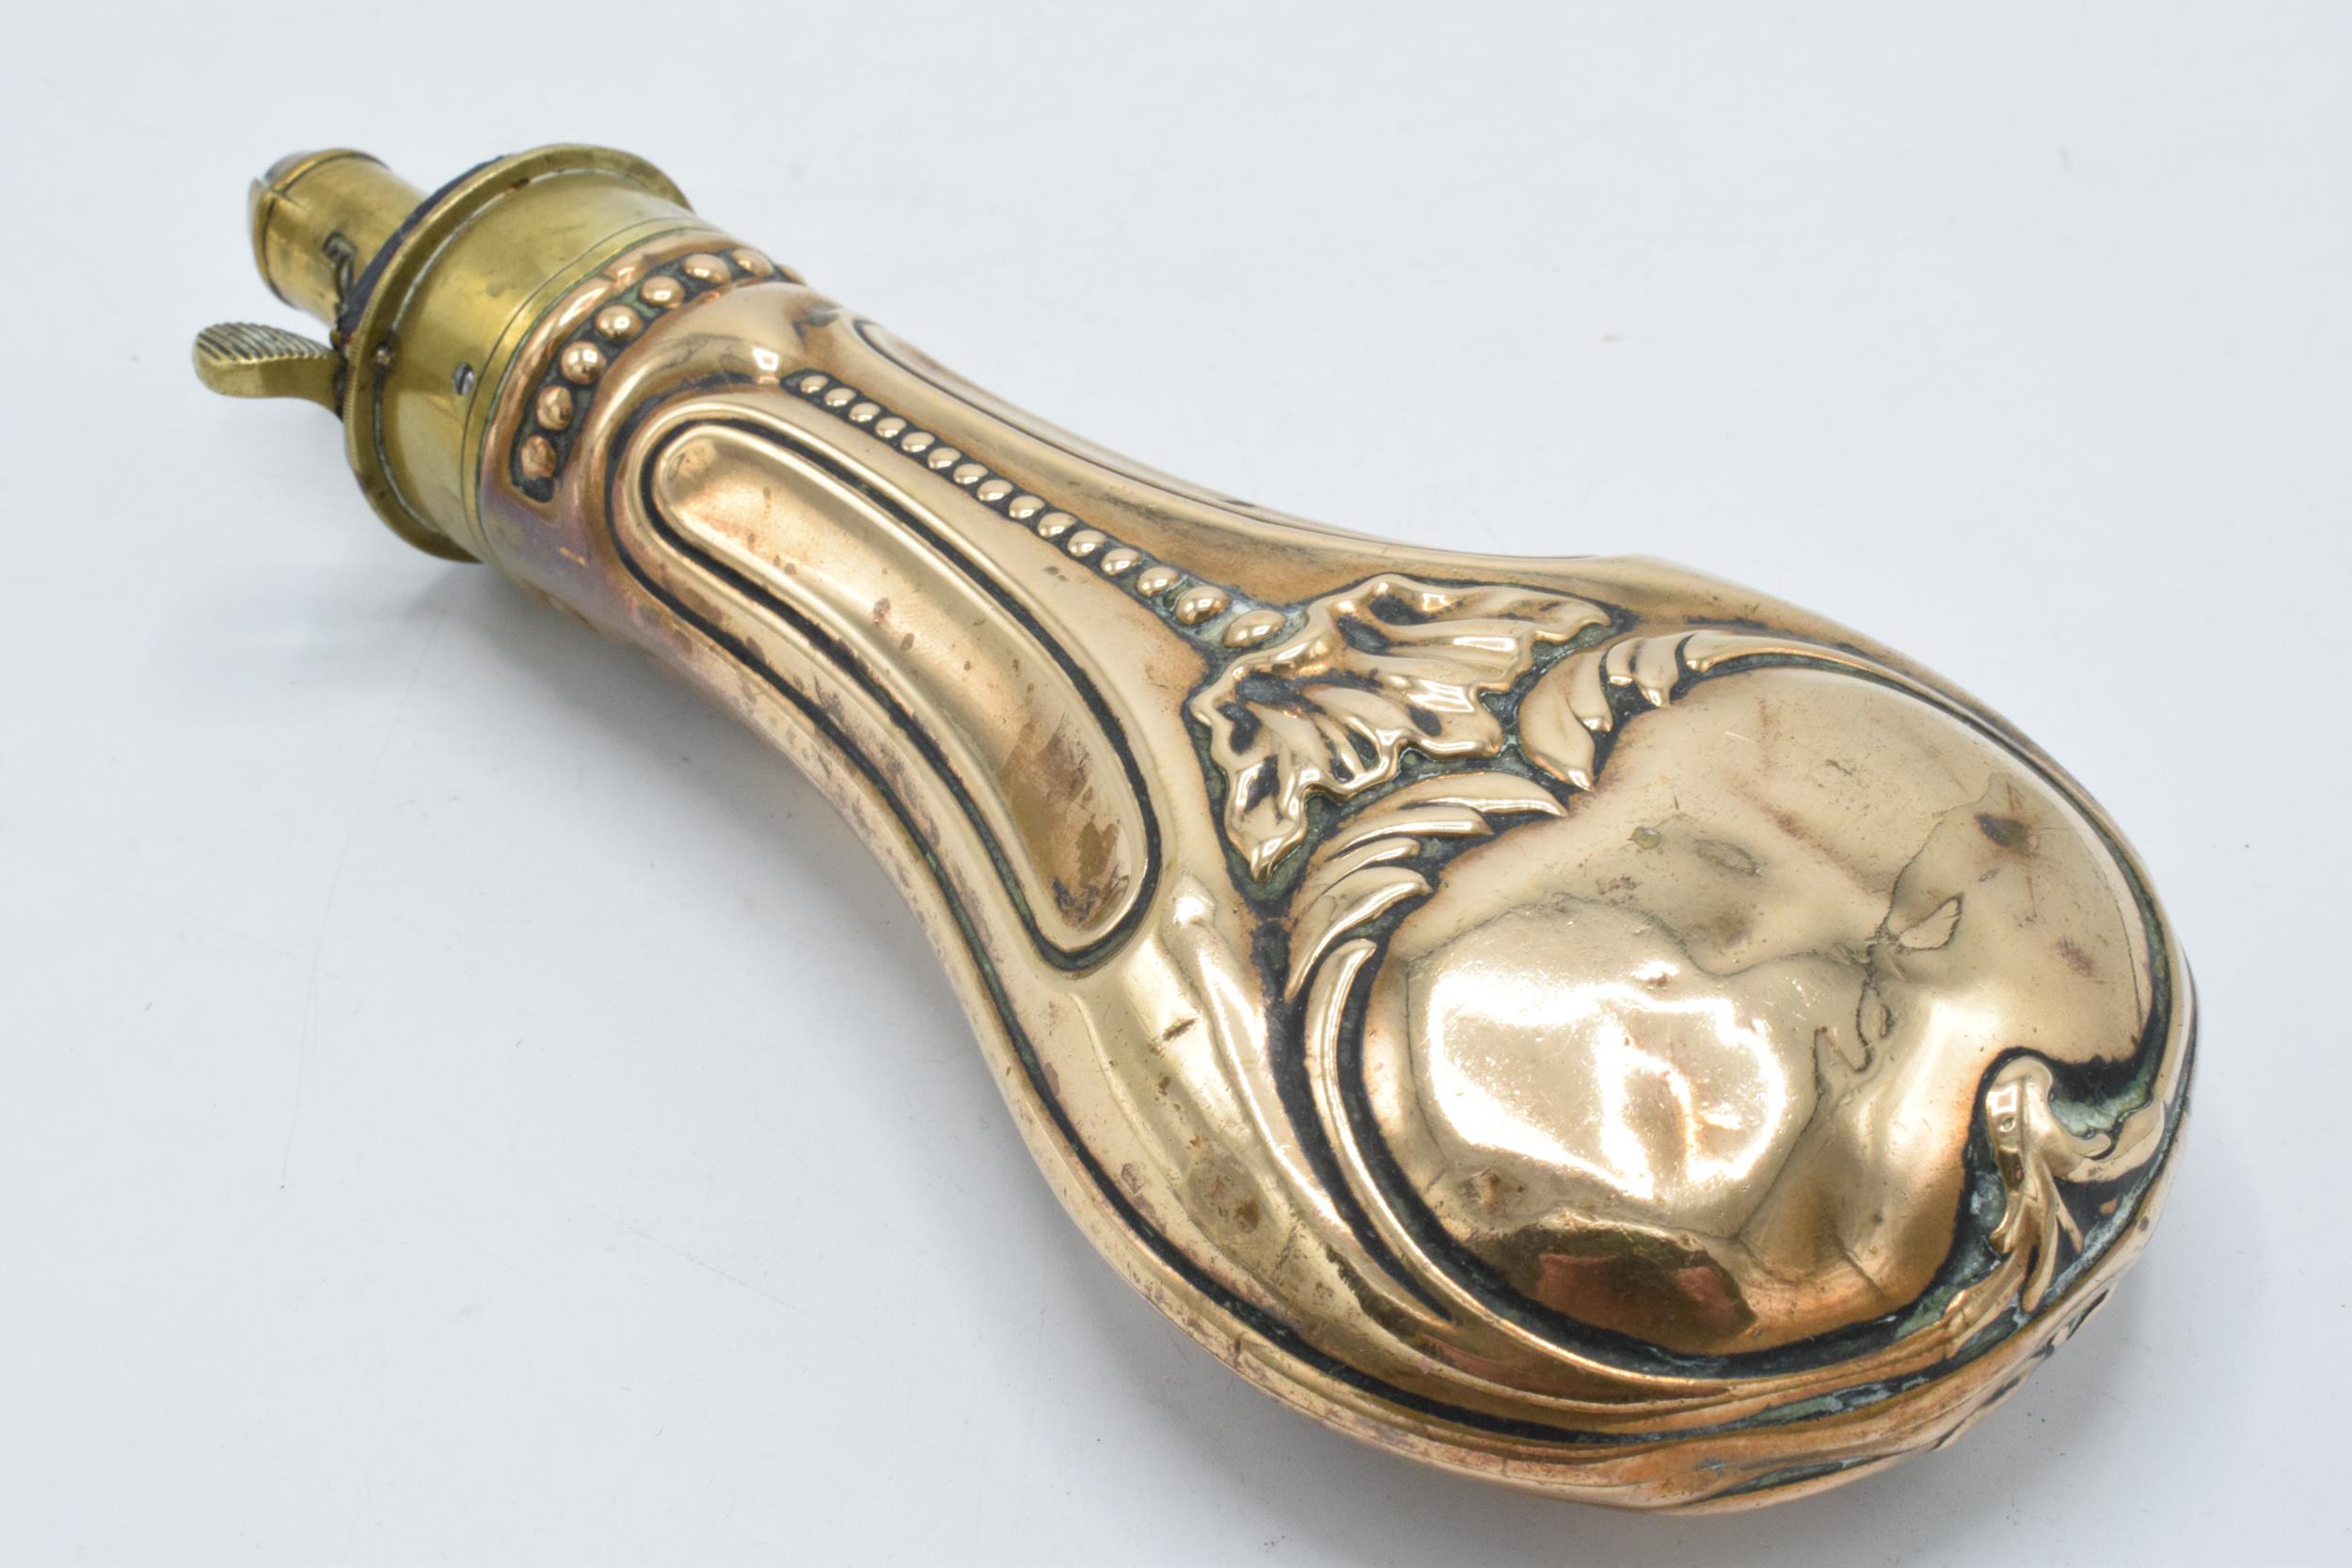 19th century copper and brass powder flask with repousse decoration by James Dixon & Sons Sheffield,